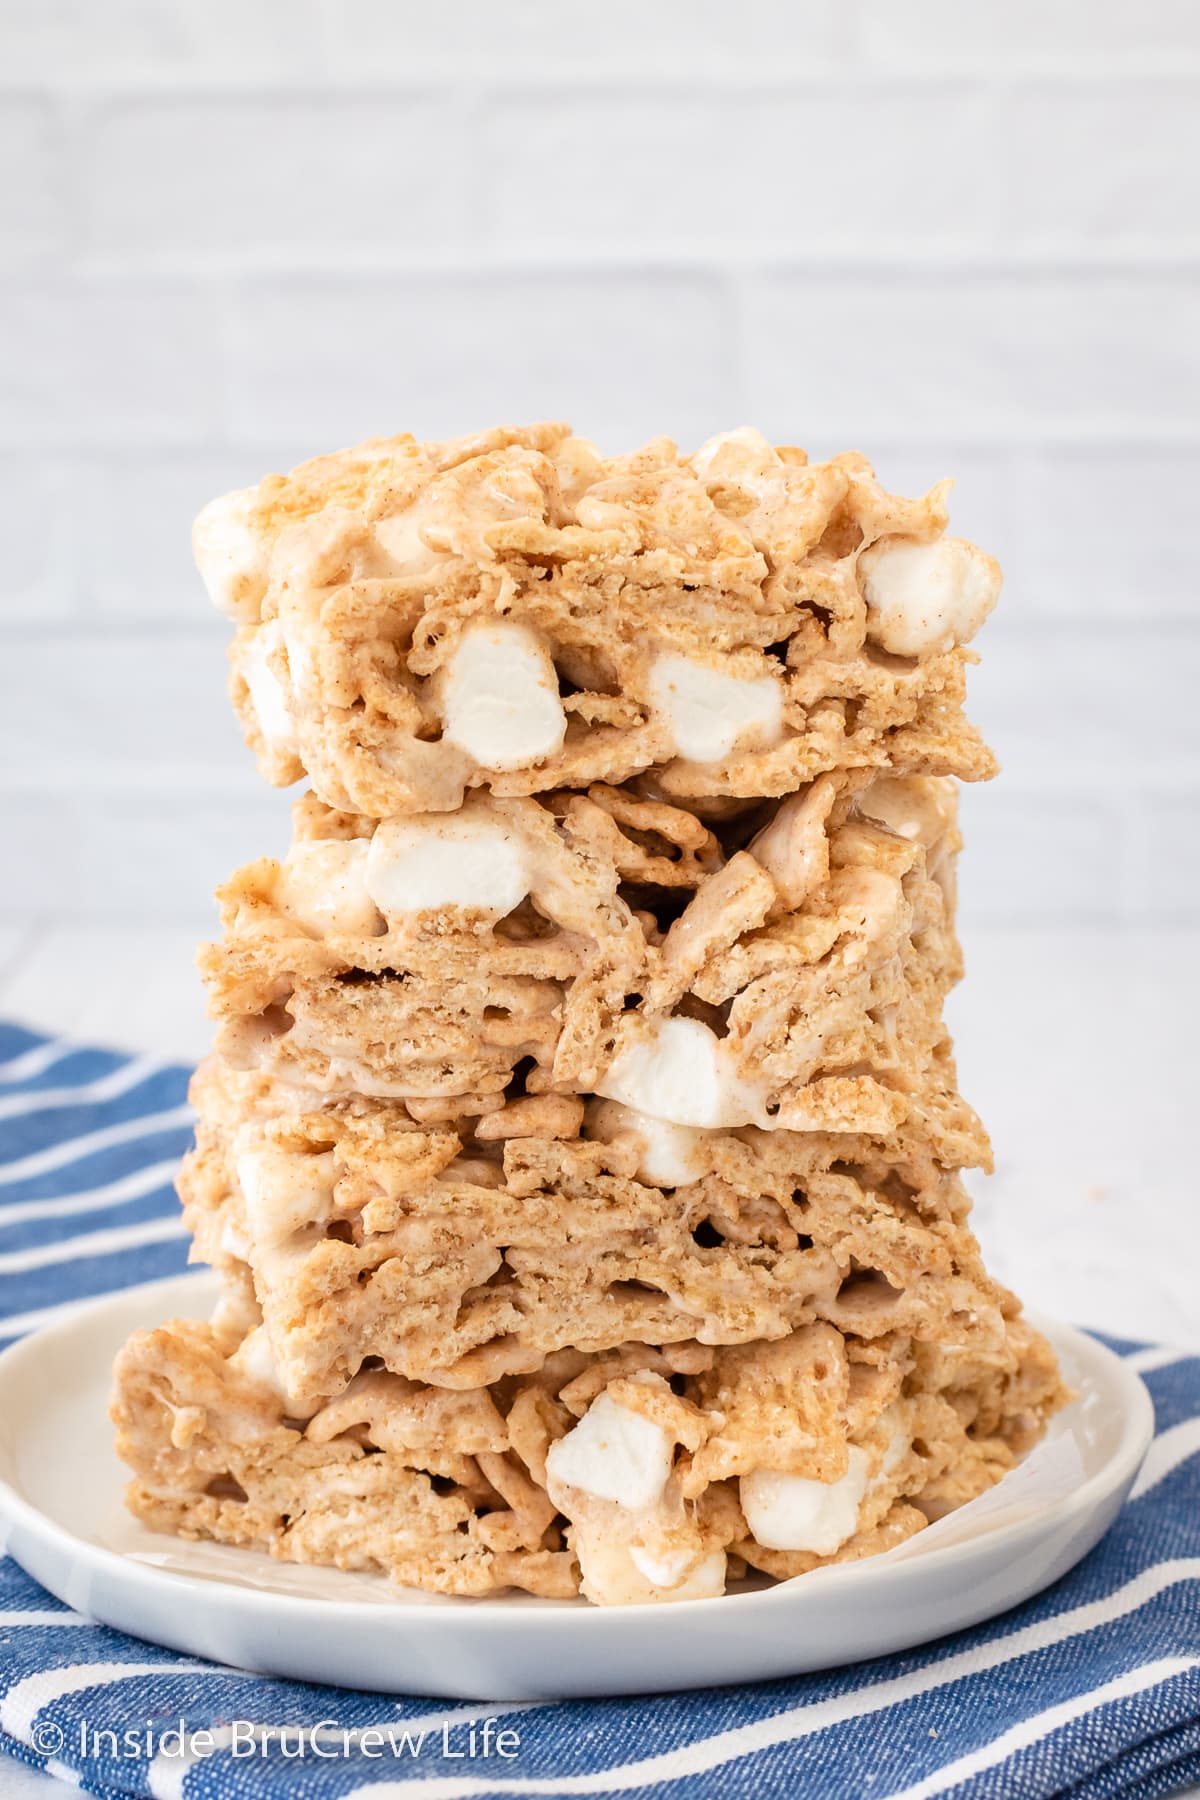 A stack of four marshmallow cereal treat bars on a white plate.